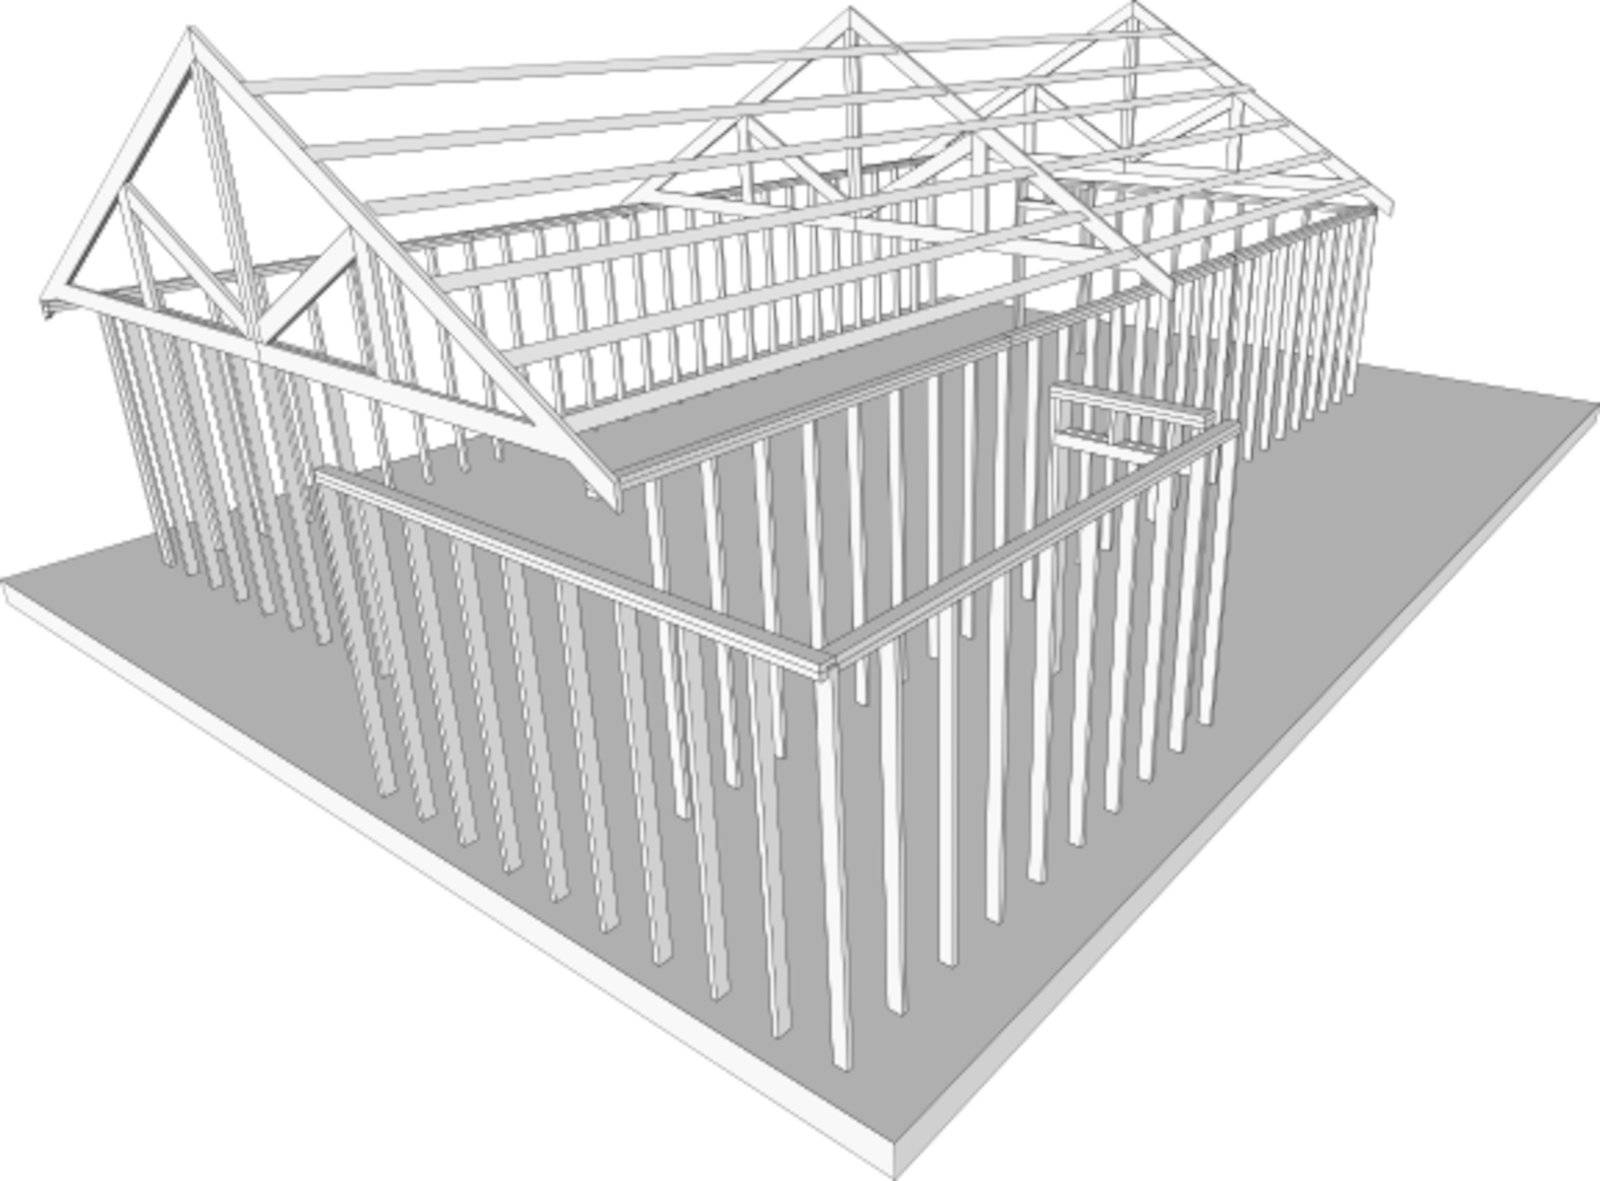 3D Architectural Model (VECTOR) by Editorial